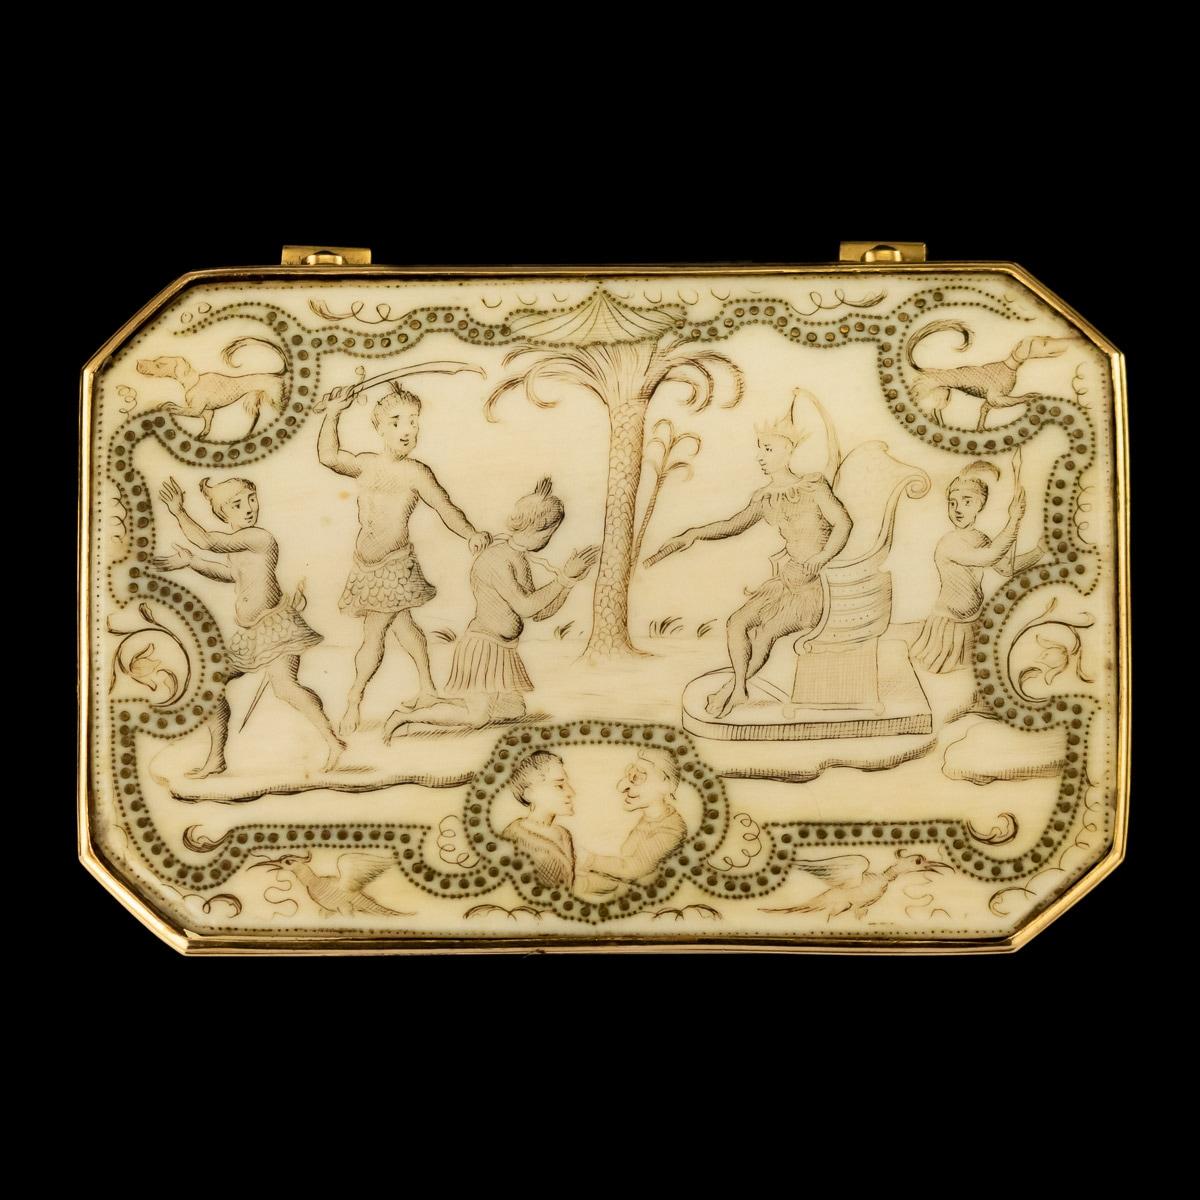 Antique early 18th Century unusual English 18-karat gold mounted snuff box, of rectangular form with cut corners, the front depicting a sacrifice or an execution in front of the South American tribe leader, the edges decorated with brass pique